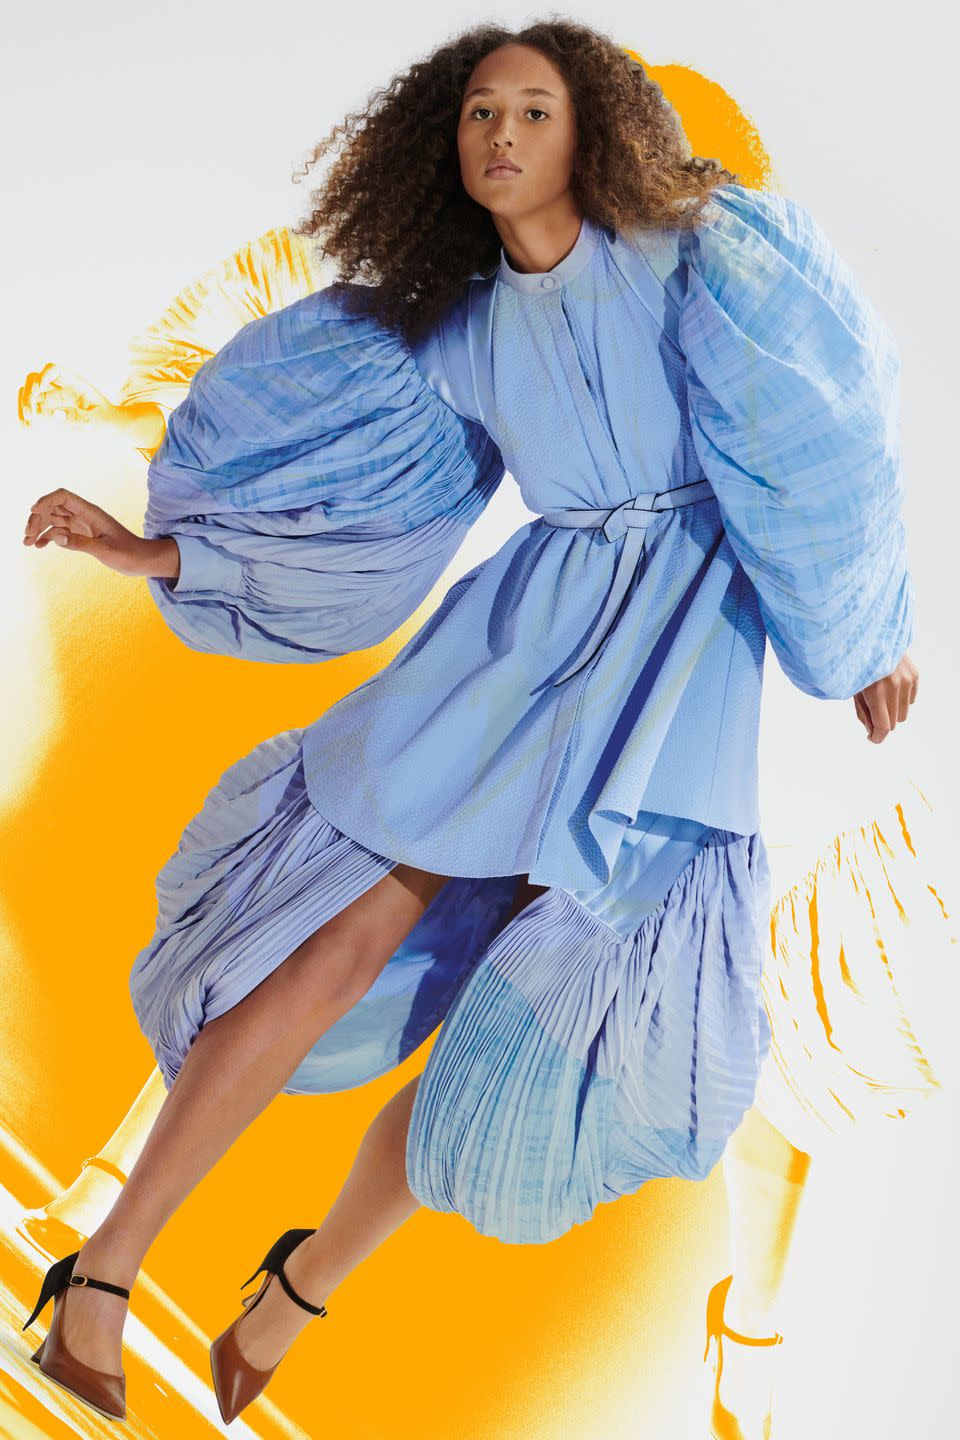 <p>Loewe’s Jonathan Anderson made showing remotely look like a creative endeavor with some true energy behind it. His resort 2021 collection came as a show-in-a-box containing paper dolls, and he evolved that concept for spring 2021 with what he termed a “Show-on-the-Wall.” It was, effectively, a poster presentation, made in collaboration with M/M (Paris) and artist Anthea Hamilton, and was full of movement and whimsy. An artist’s portfolio featuring giant fold-out posters of the looks was sent to editors, buyers, and friends of the brand. The special delivery also included a DIY set: a roll of wallpaper designed by the artist, wallpaper borders, wallpaper glue, a brush, and scissors. There was even a beetroot scent disc and a soundtrack by way of choral sheet music by Thomas Tallis to keep the experiential aspect of runway presentations alive and well via an entirely new approach. The clothes themselves spoke volumes, with an emphasis on the theatrical and sculptural. There were balloon sleeves, crinoline skirts, and other bold shapes sending the message that even though this is a moment where we’re hiding out, we can still be as big and as bold as we want to be. —<em>Kerry Pieri</em></p>